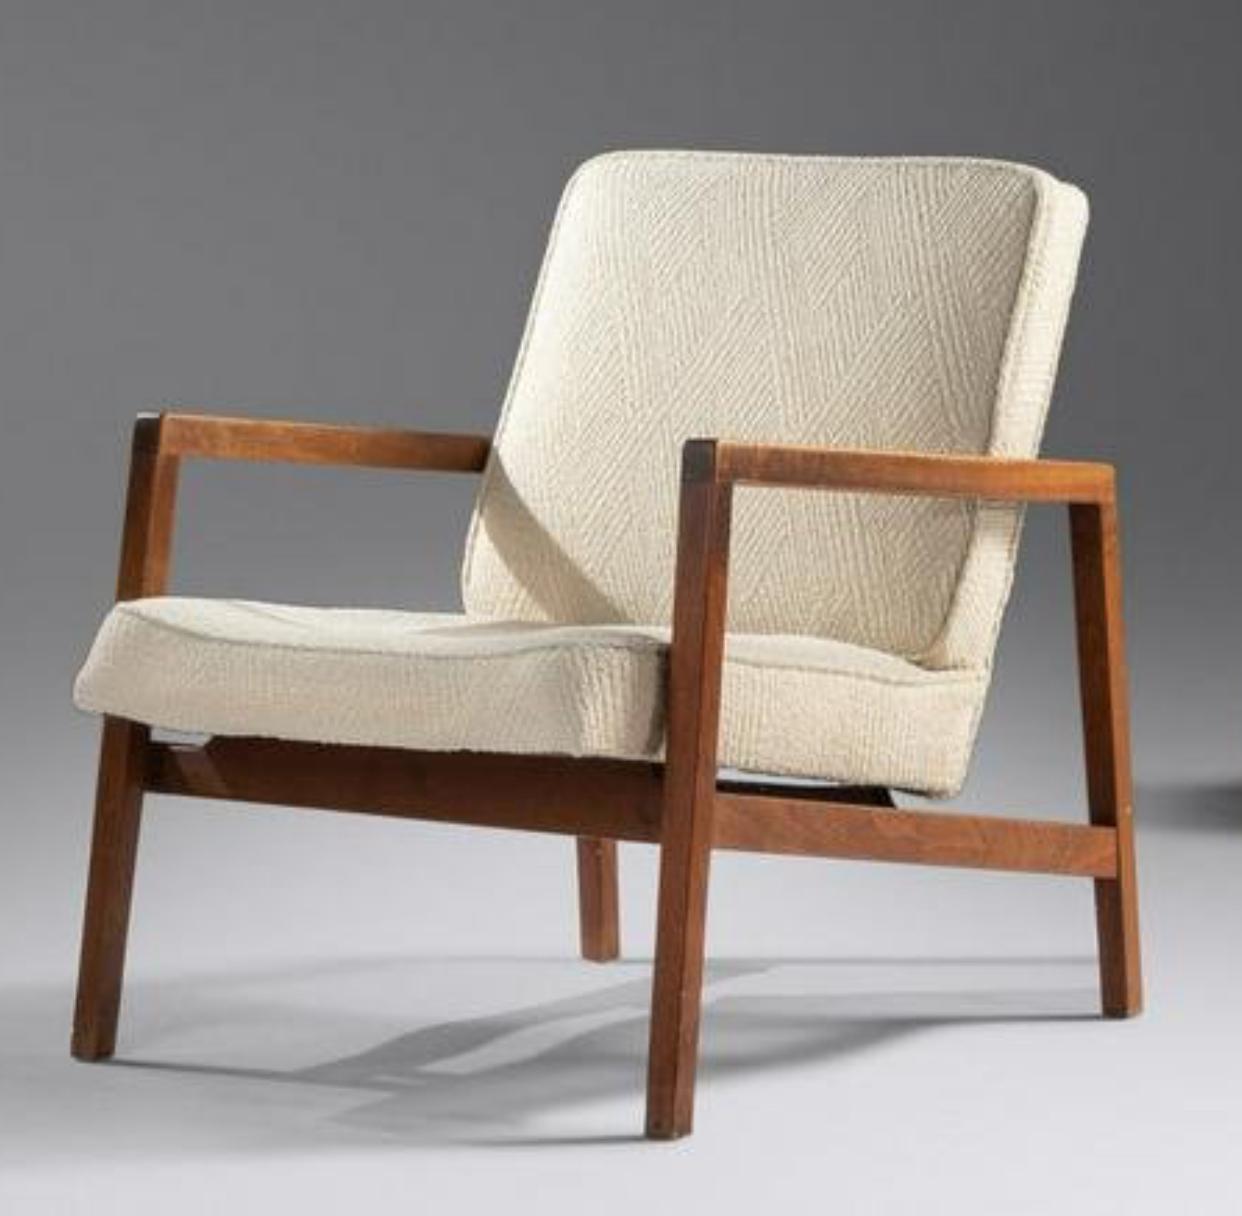 Pair of Lewis Butler for Knoll open arm longe chairs. Frames are a nicely grained walnut wood. The seats and back cushions are upholstered in an older textured pattern wool. The upholstery itself is in decent shape but the cushions have gone stiff.